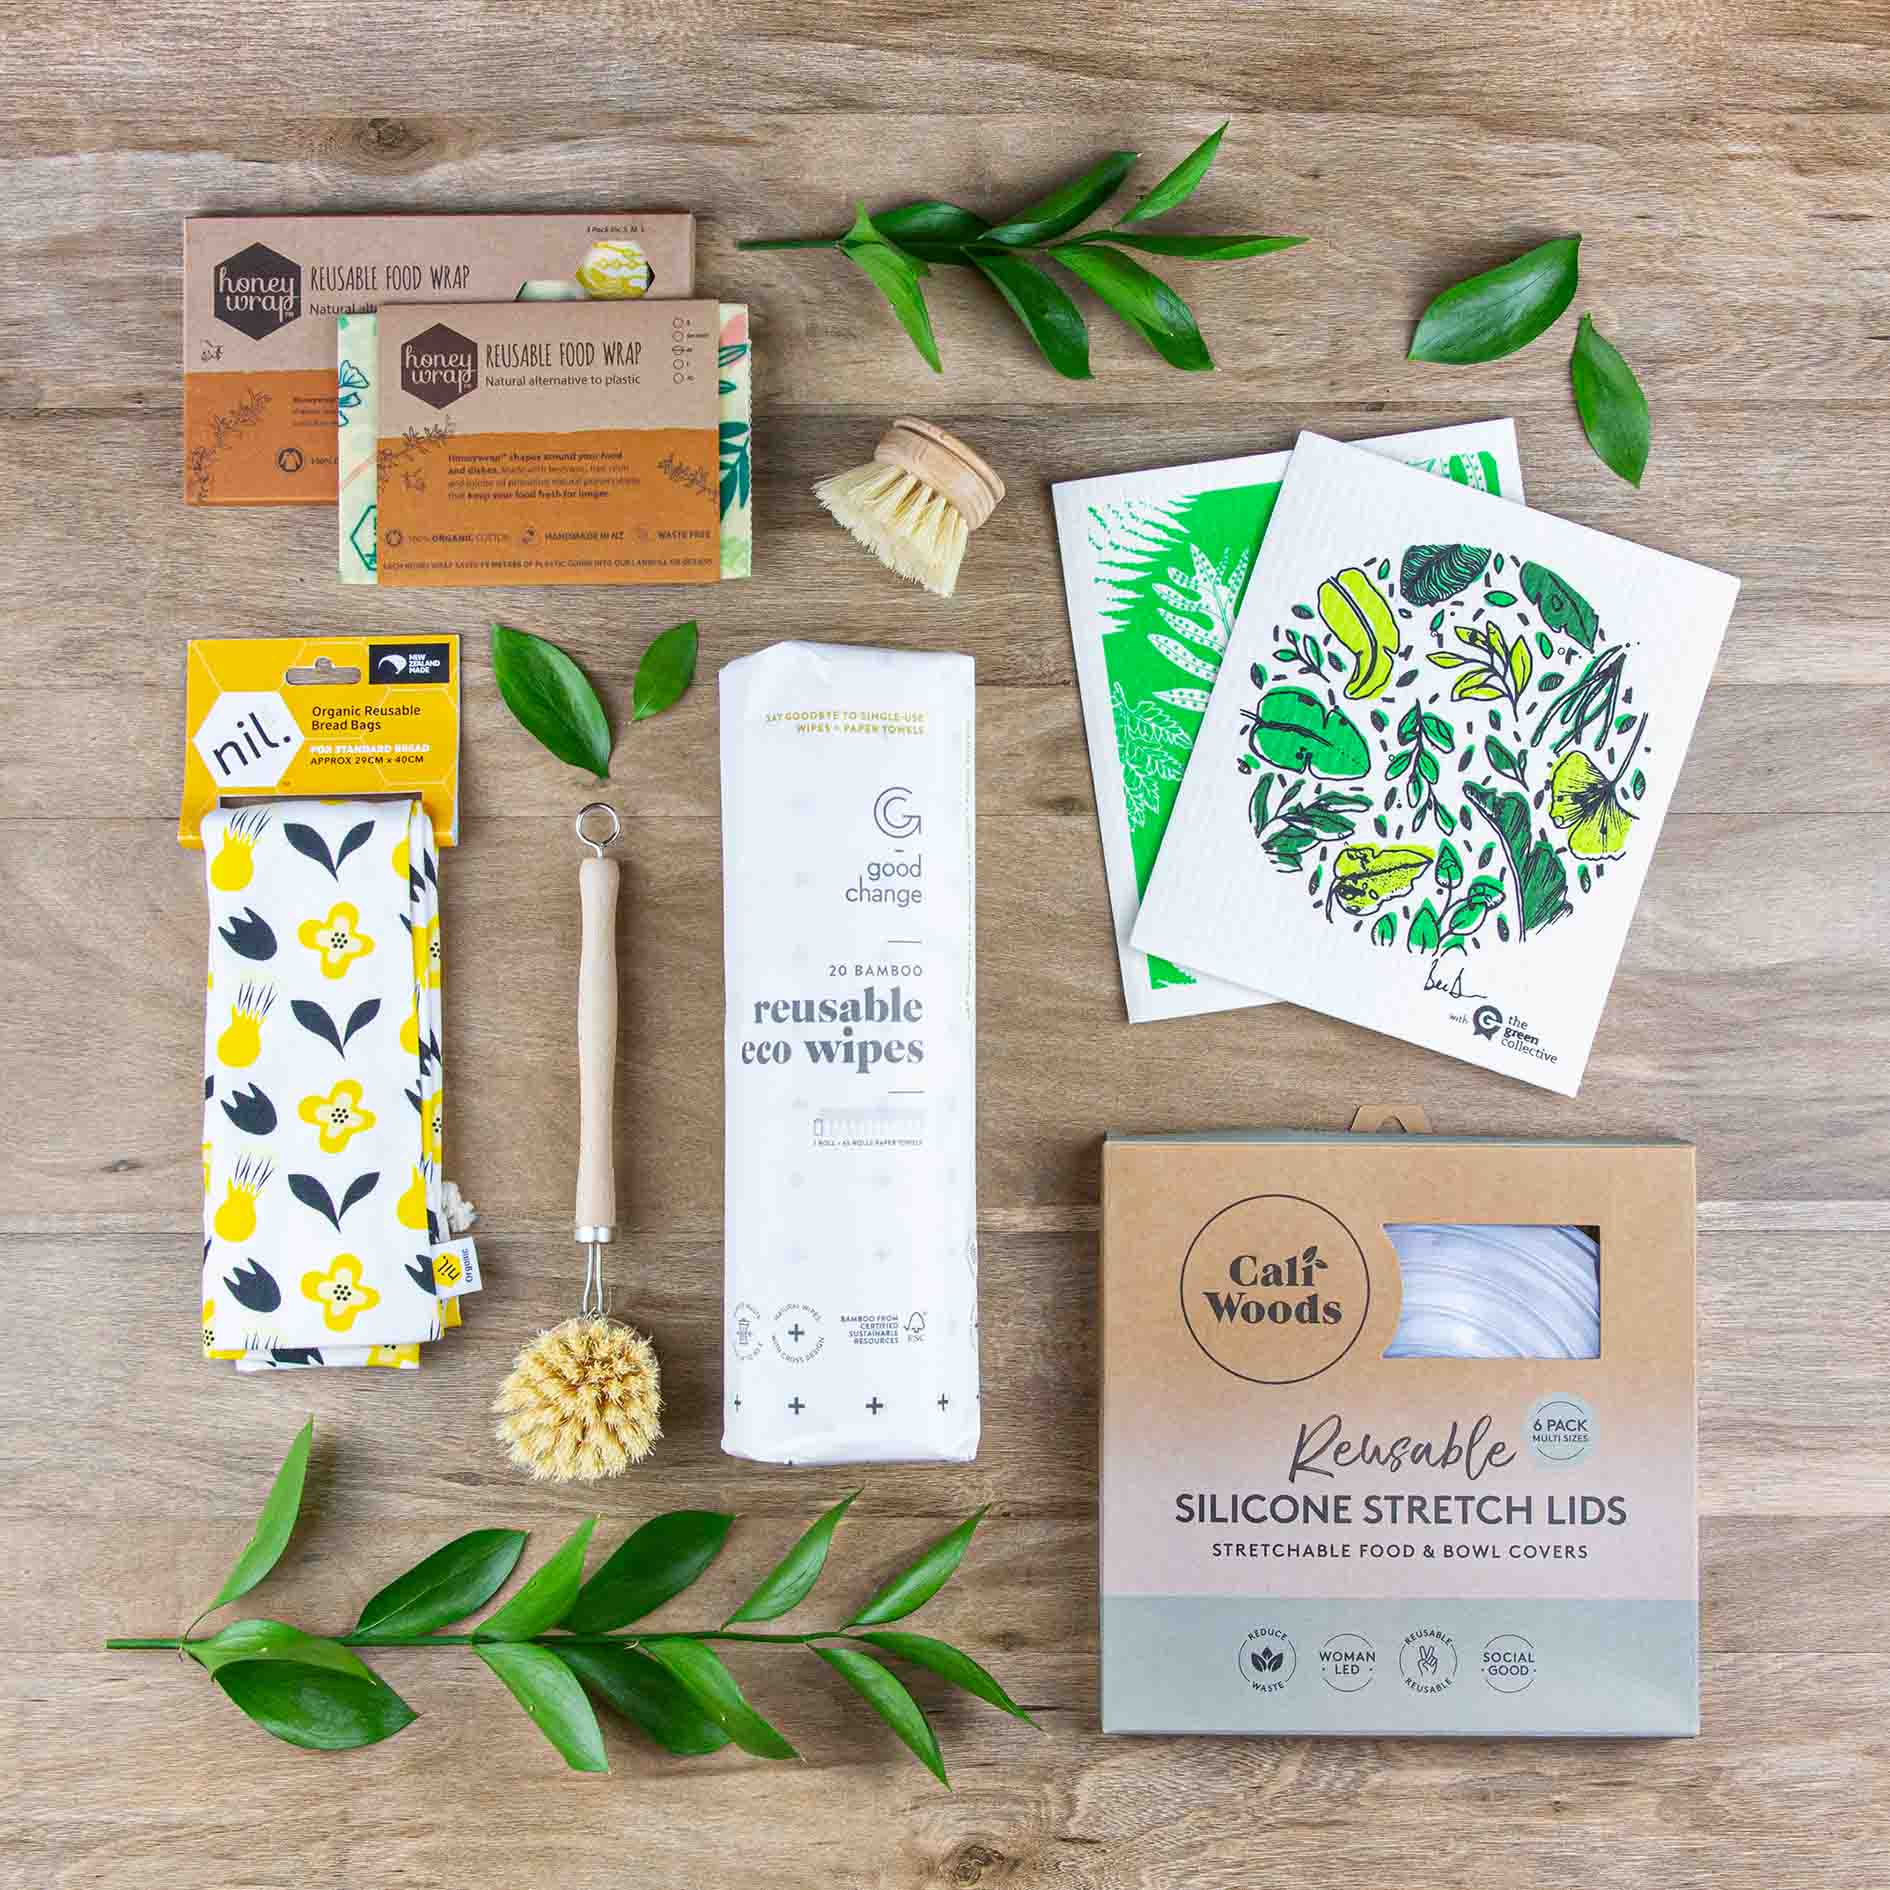 A range of zero waste cleaning and food storage products neatly laid out on a wooden floor. Products include dish cloths, beeswax wraps, eco wipes, a wooden dish brush and some silicone lids. 